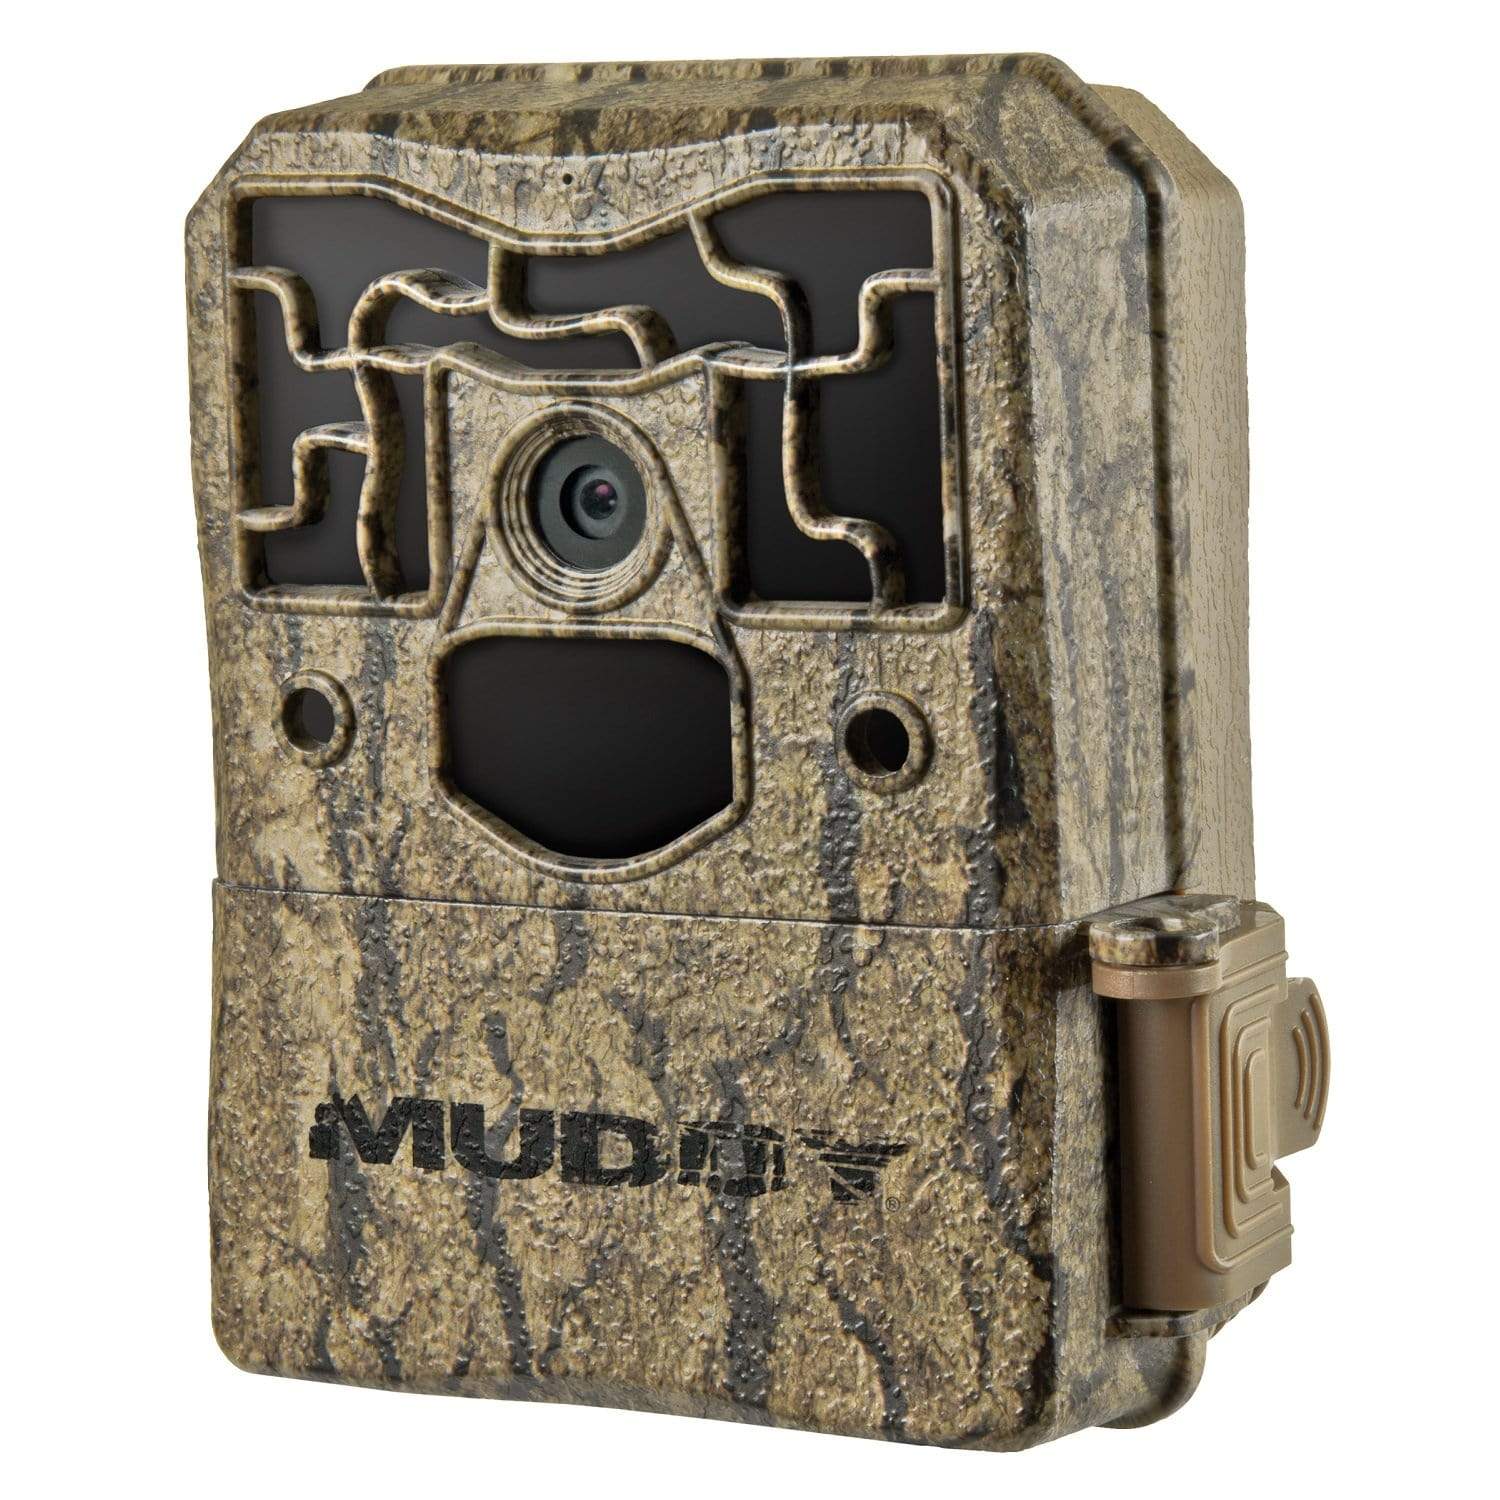 GSM Outdoors Hunting : Game Cameras Muddy Pro-Cam 20 Trail Camera